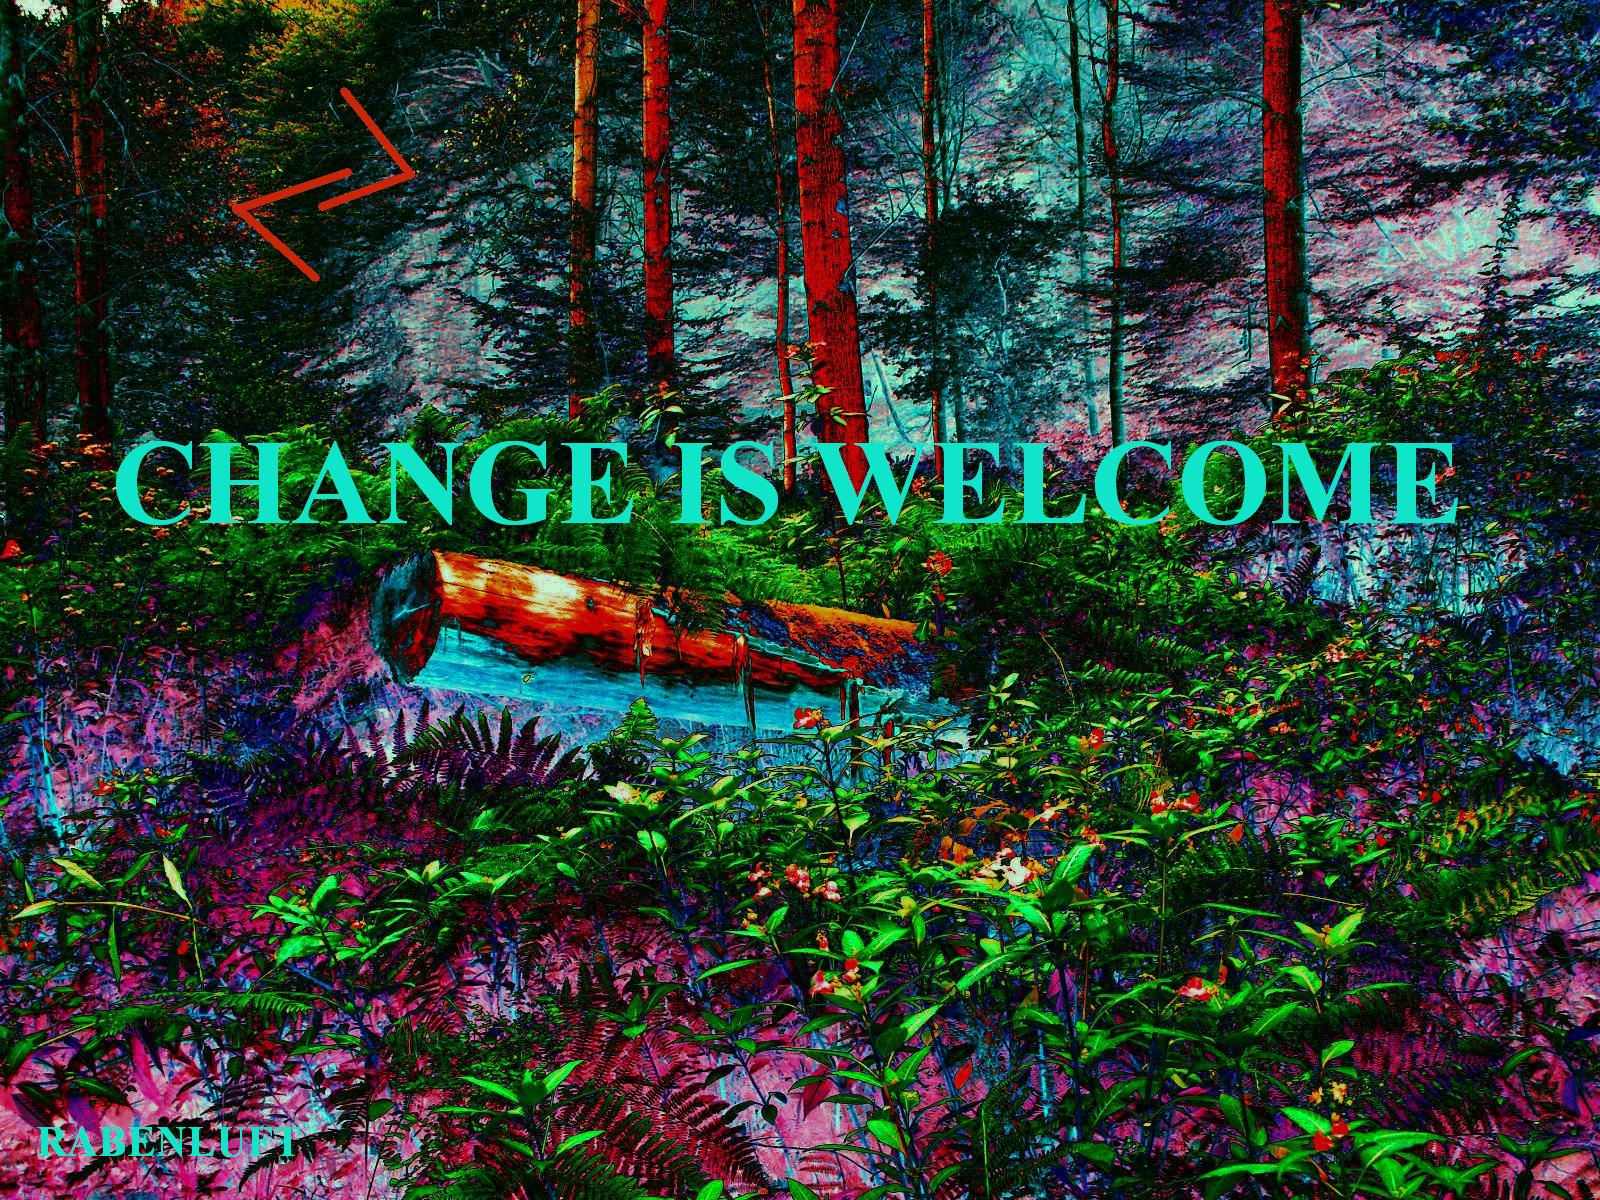 CHANGE IS WELCOME